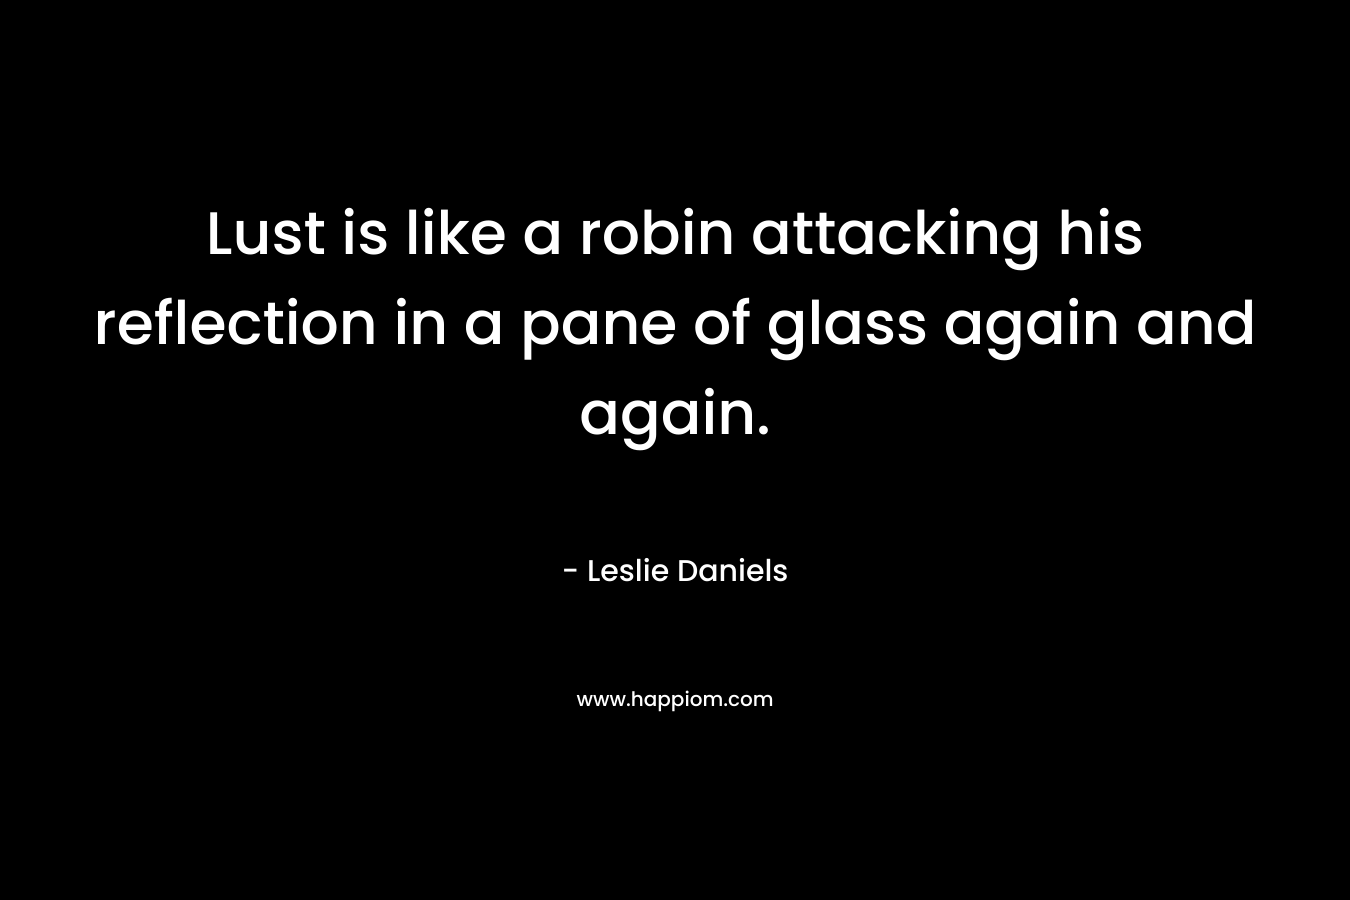 Lust is like a robin attacking his reflection in a pane of glass again and again. – Leslie Daniels